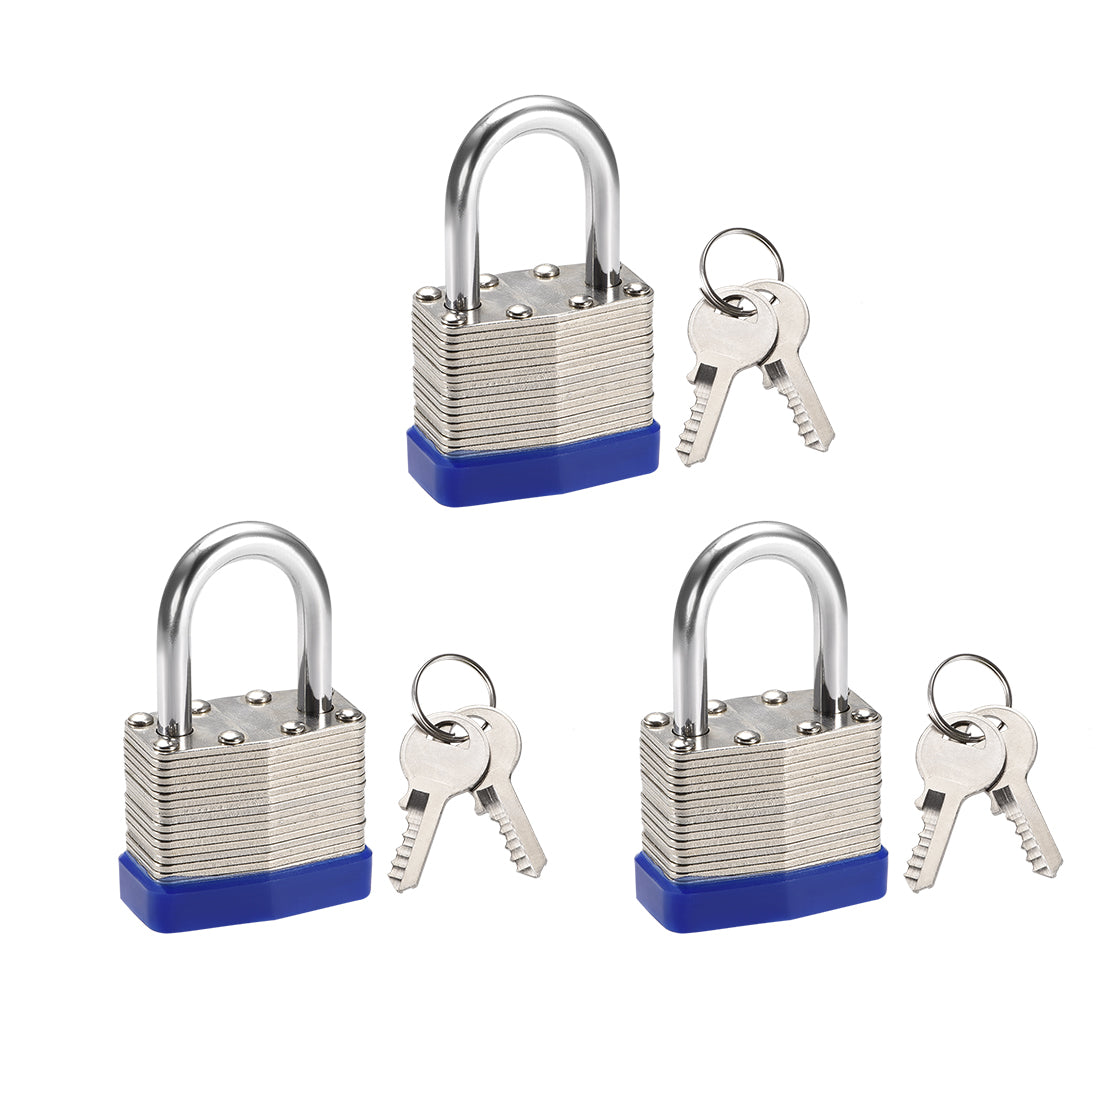 uxcell Uxcell 3pcs 1 Inch Shackle Key Different Safety Padlock Steel Lock